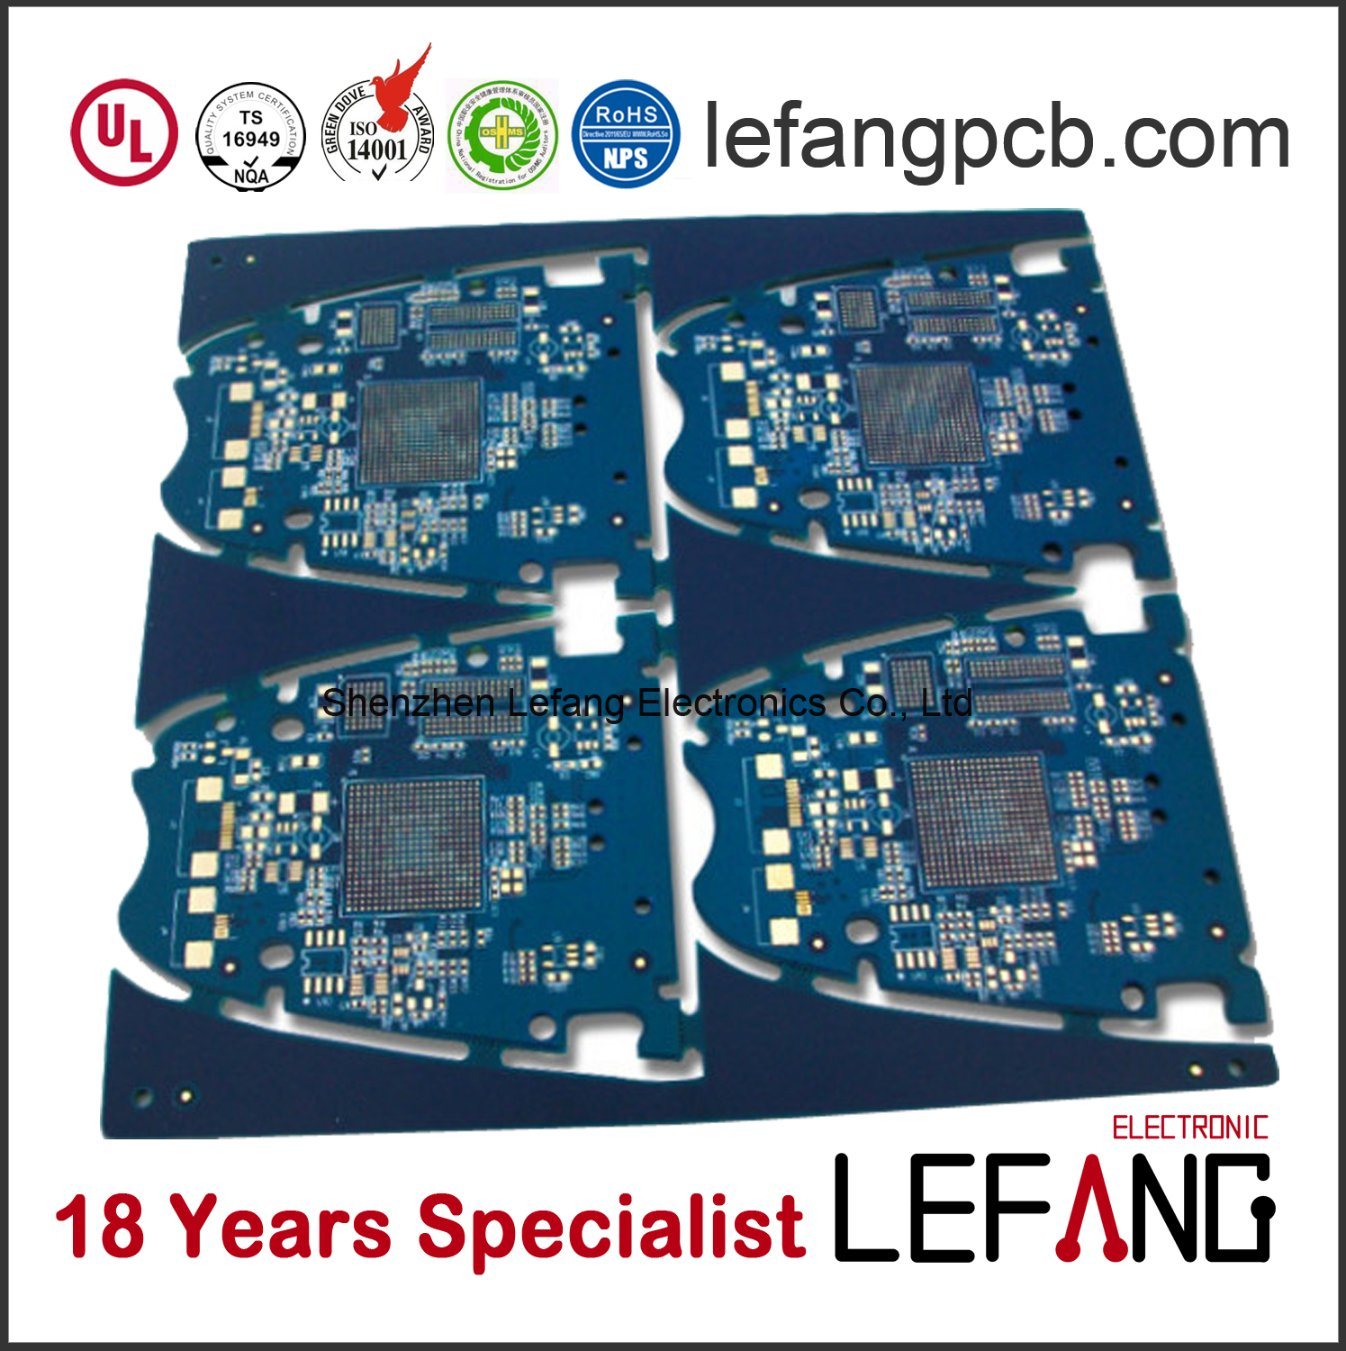 PCB Board for Intelligent Alarm Bell